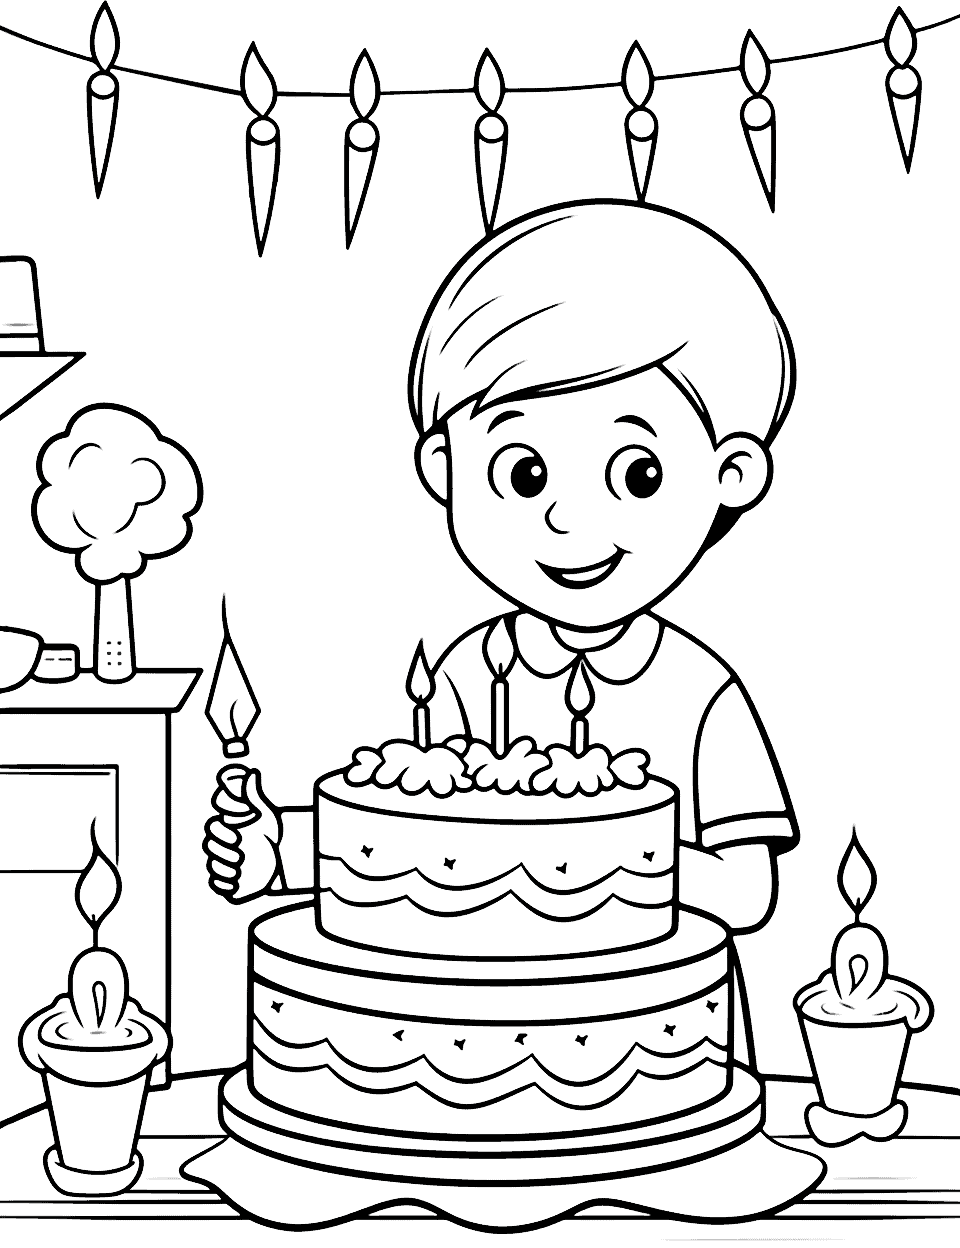 Cooking-themed Birthday Happy Coloring Page - A budding chef baking a birthday cake in the kitchen.